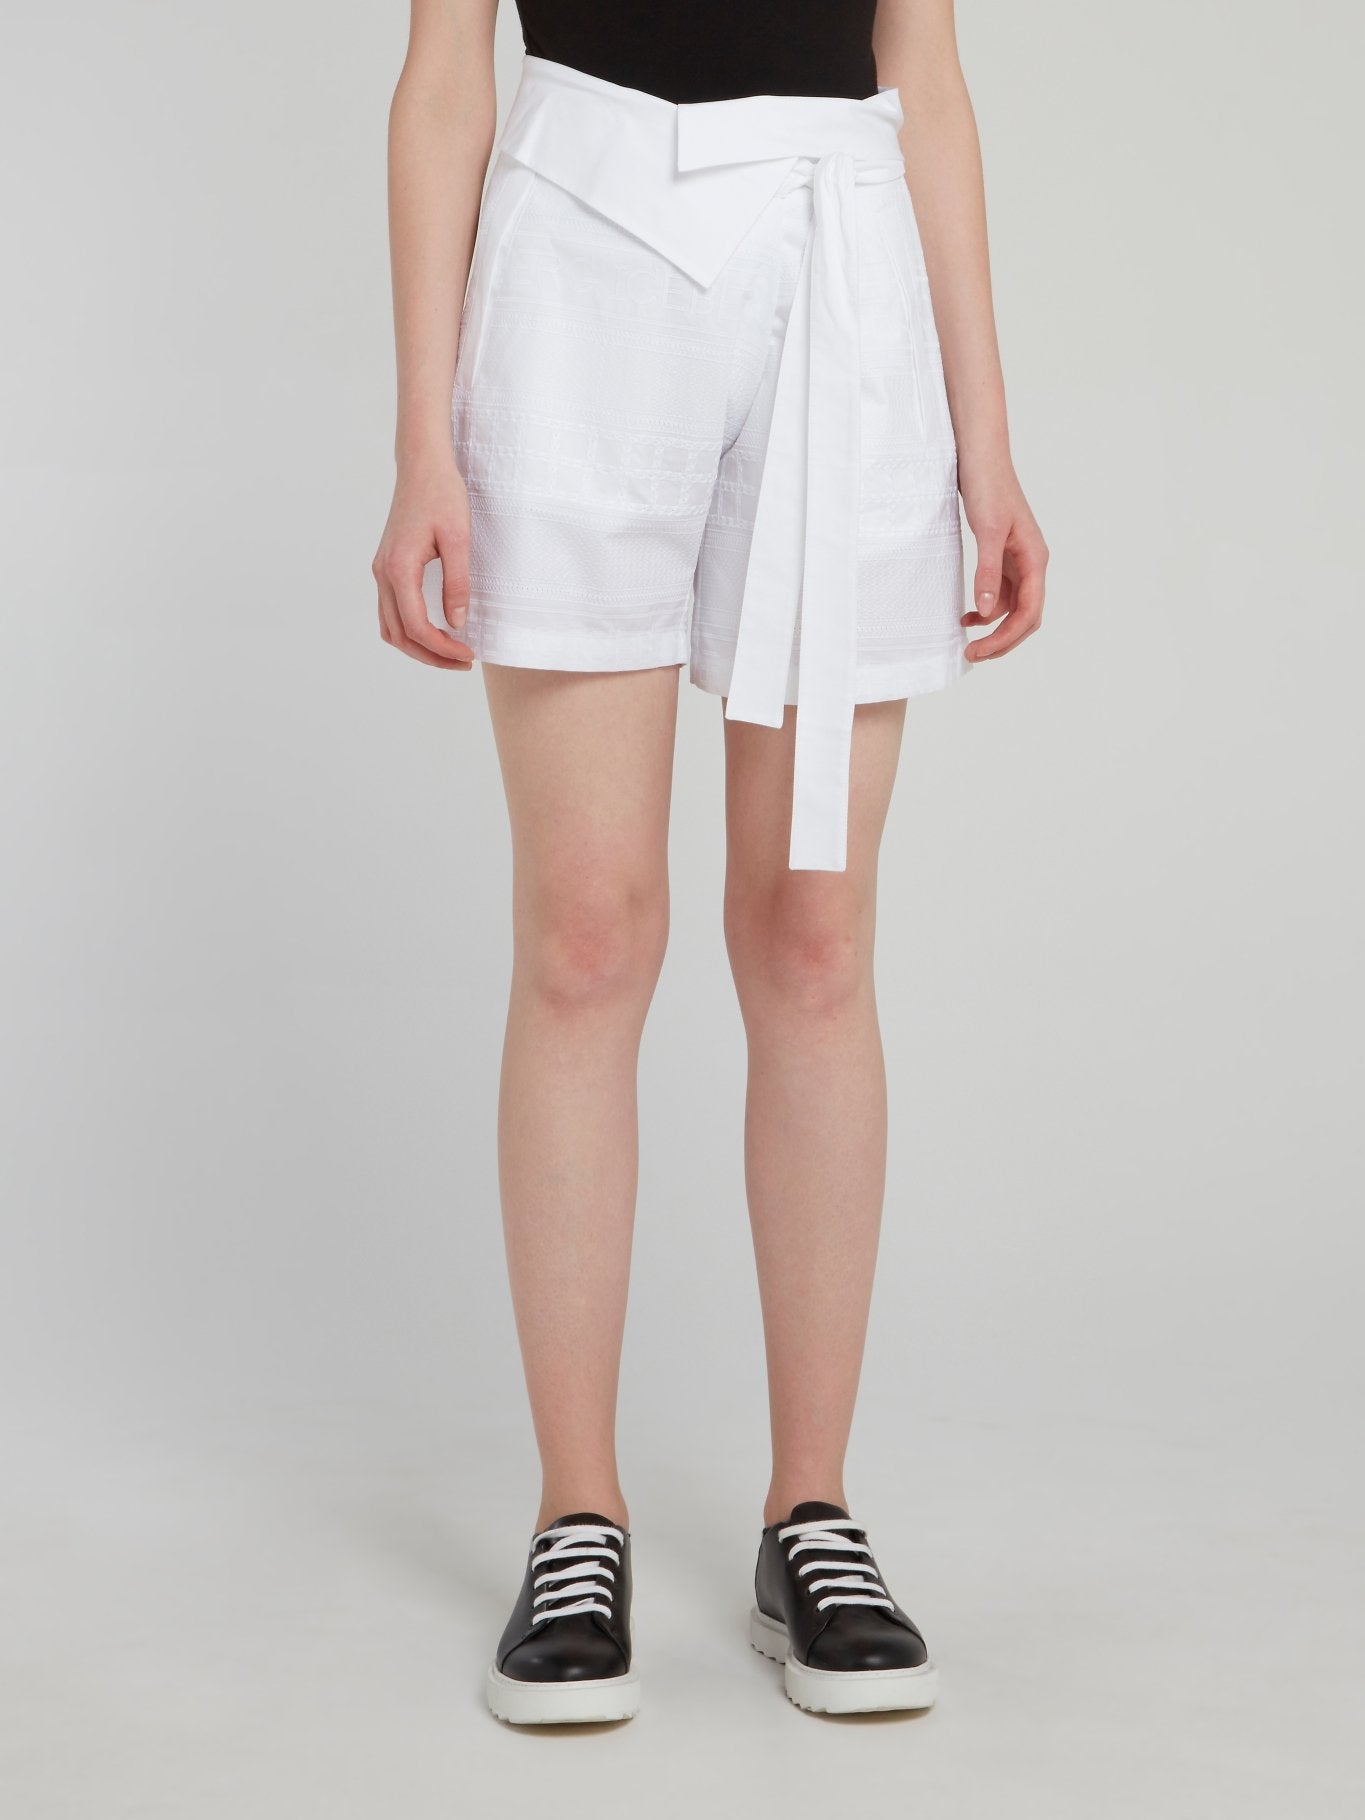 White Tie Front Detail Shorts